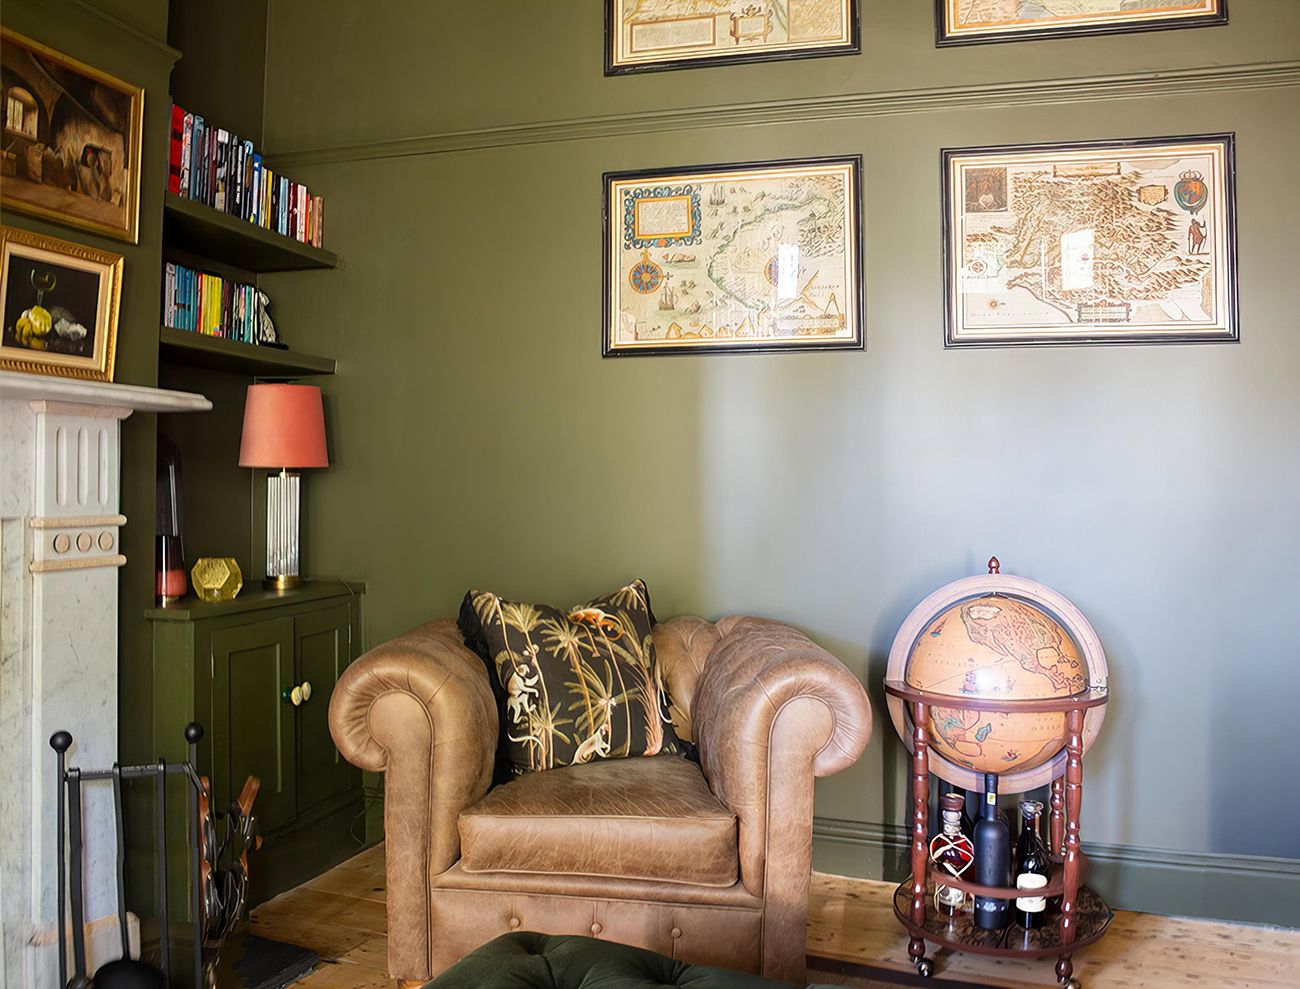 A photo of the leather chesterfield chair with a globe bar in the living room.